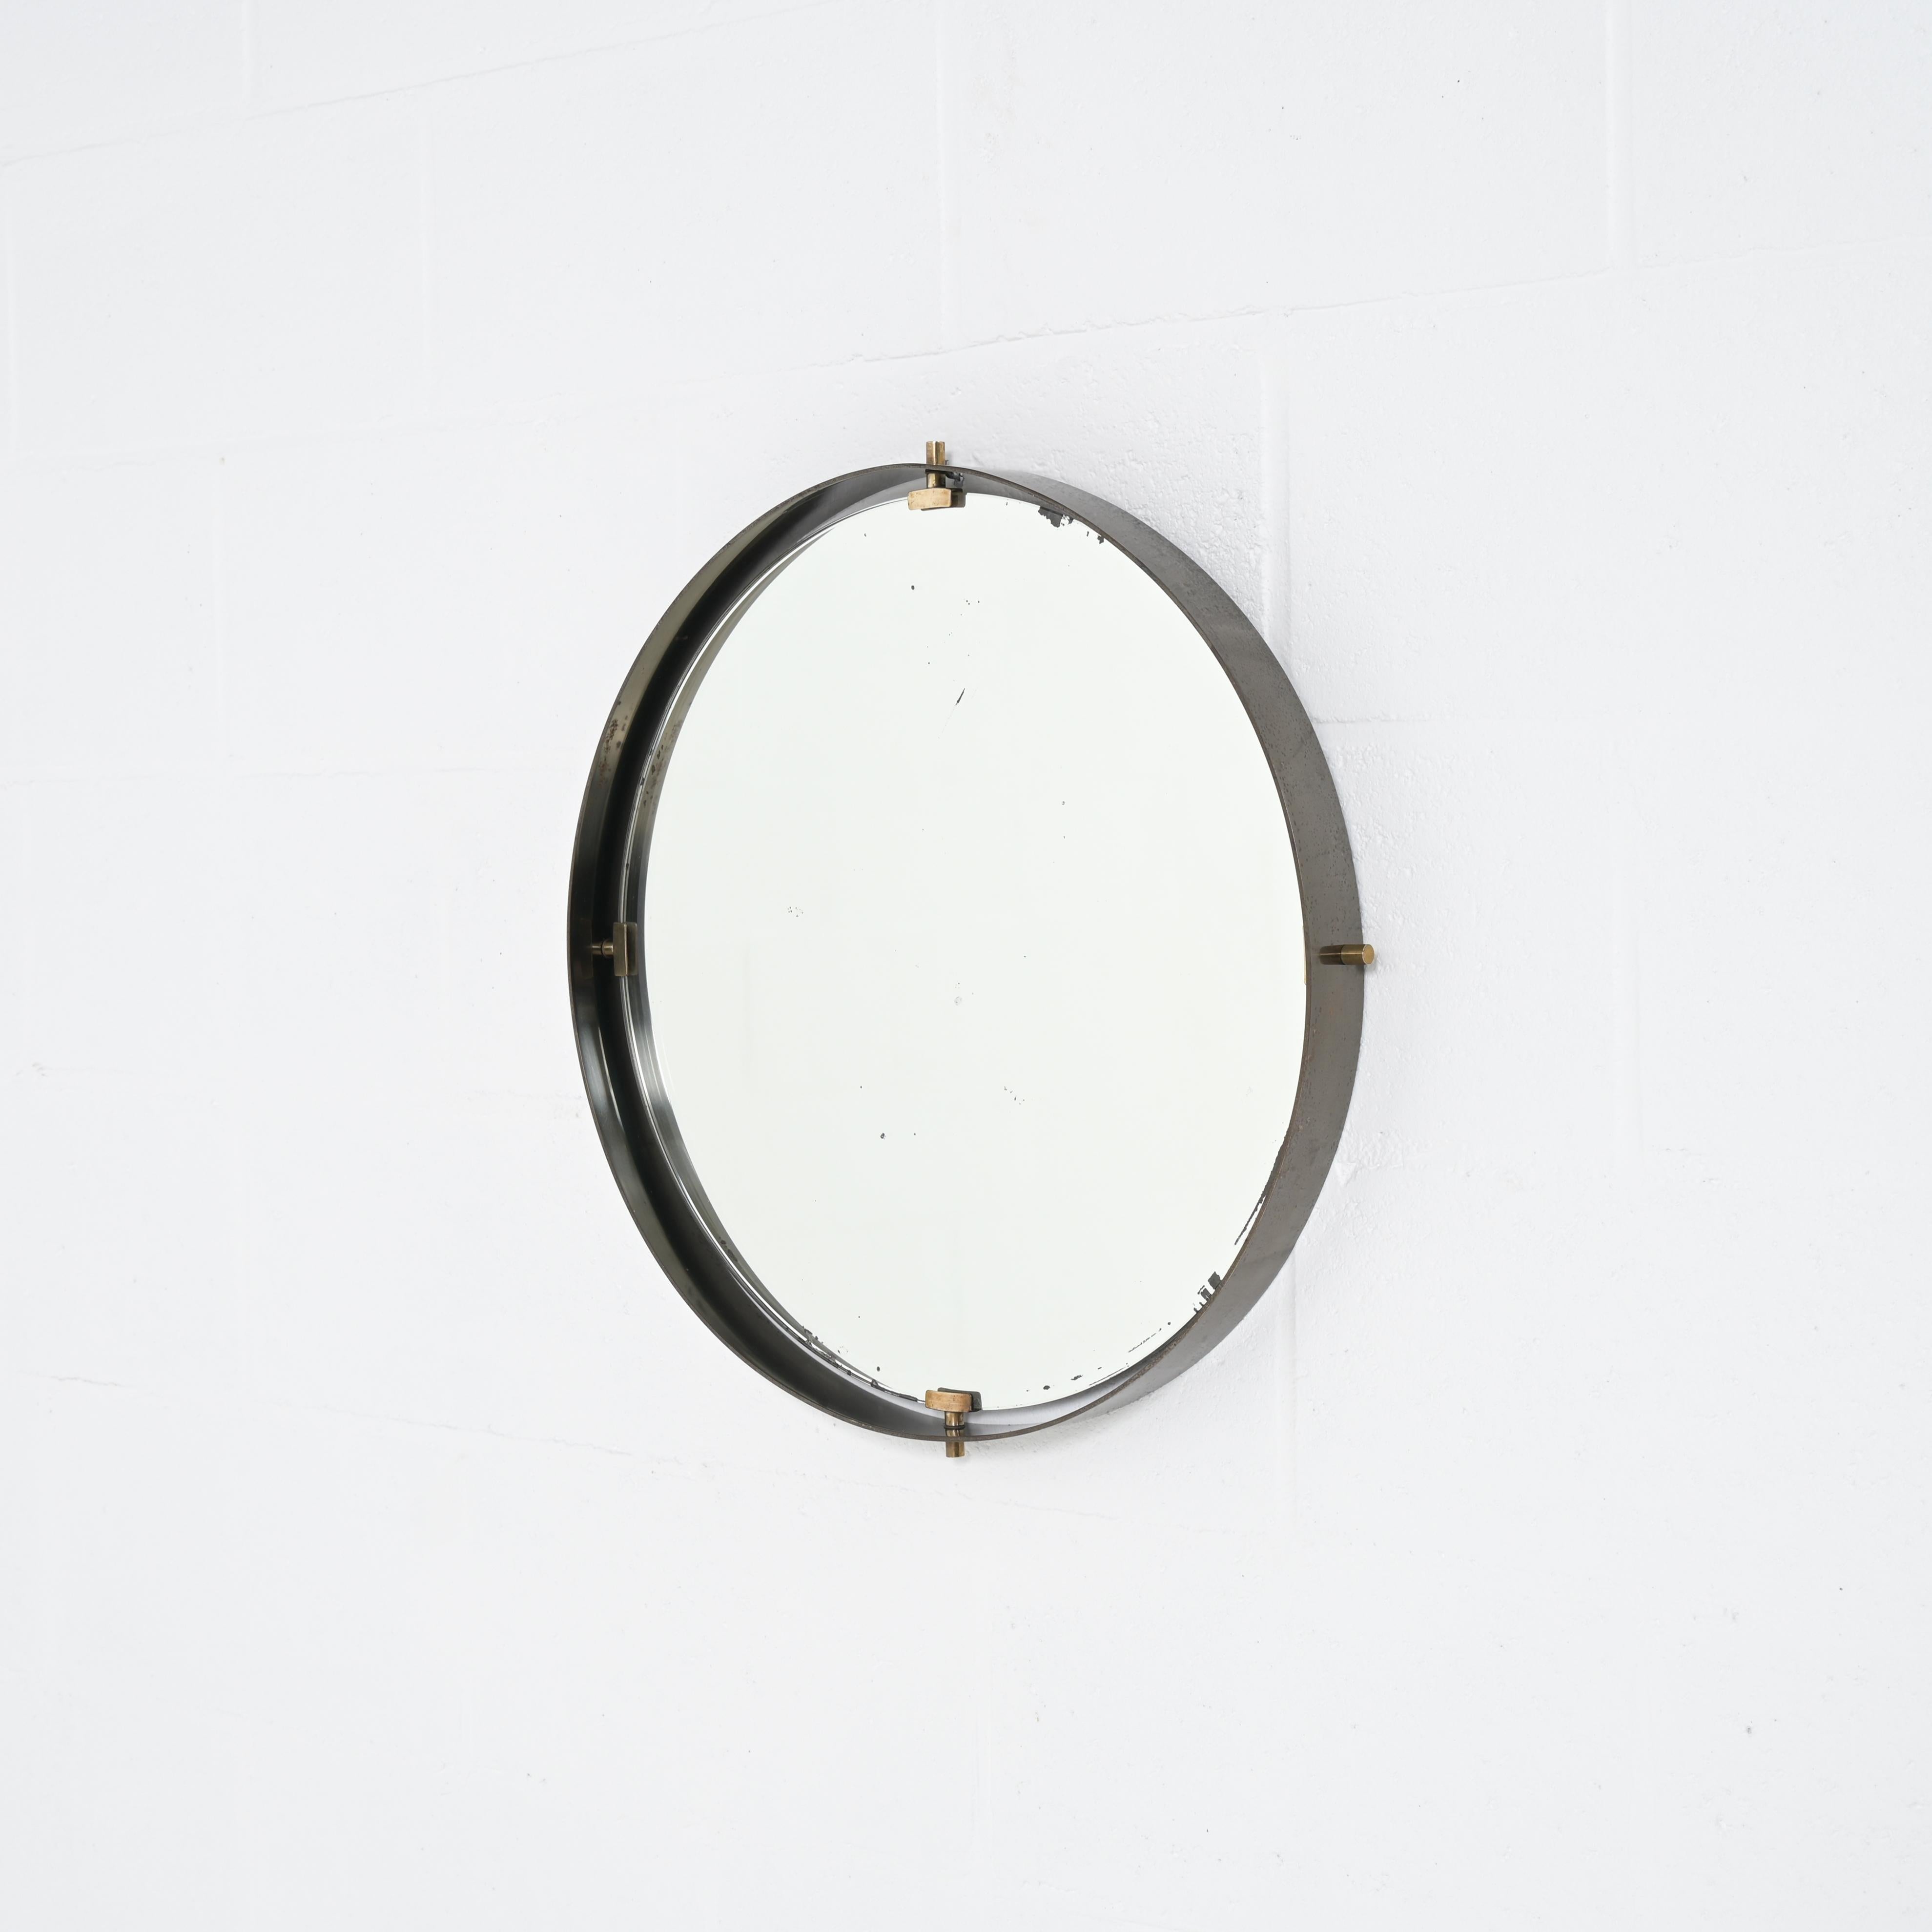 Because of its high-quality finish and design, I can attribute this mirror to Fontana Arte. The mirror is aged and have some small marks as you can see in the pictures.  The mirror is attached with 4 bronze brackets.

We can replace the mirror if